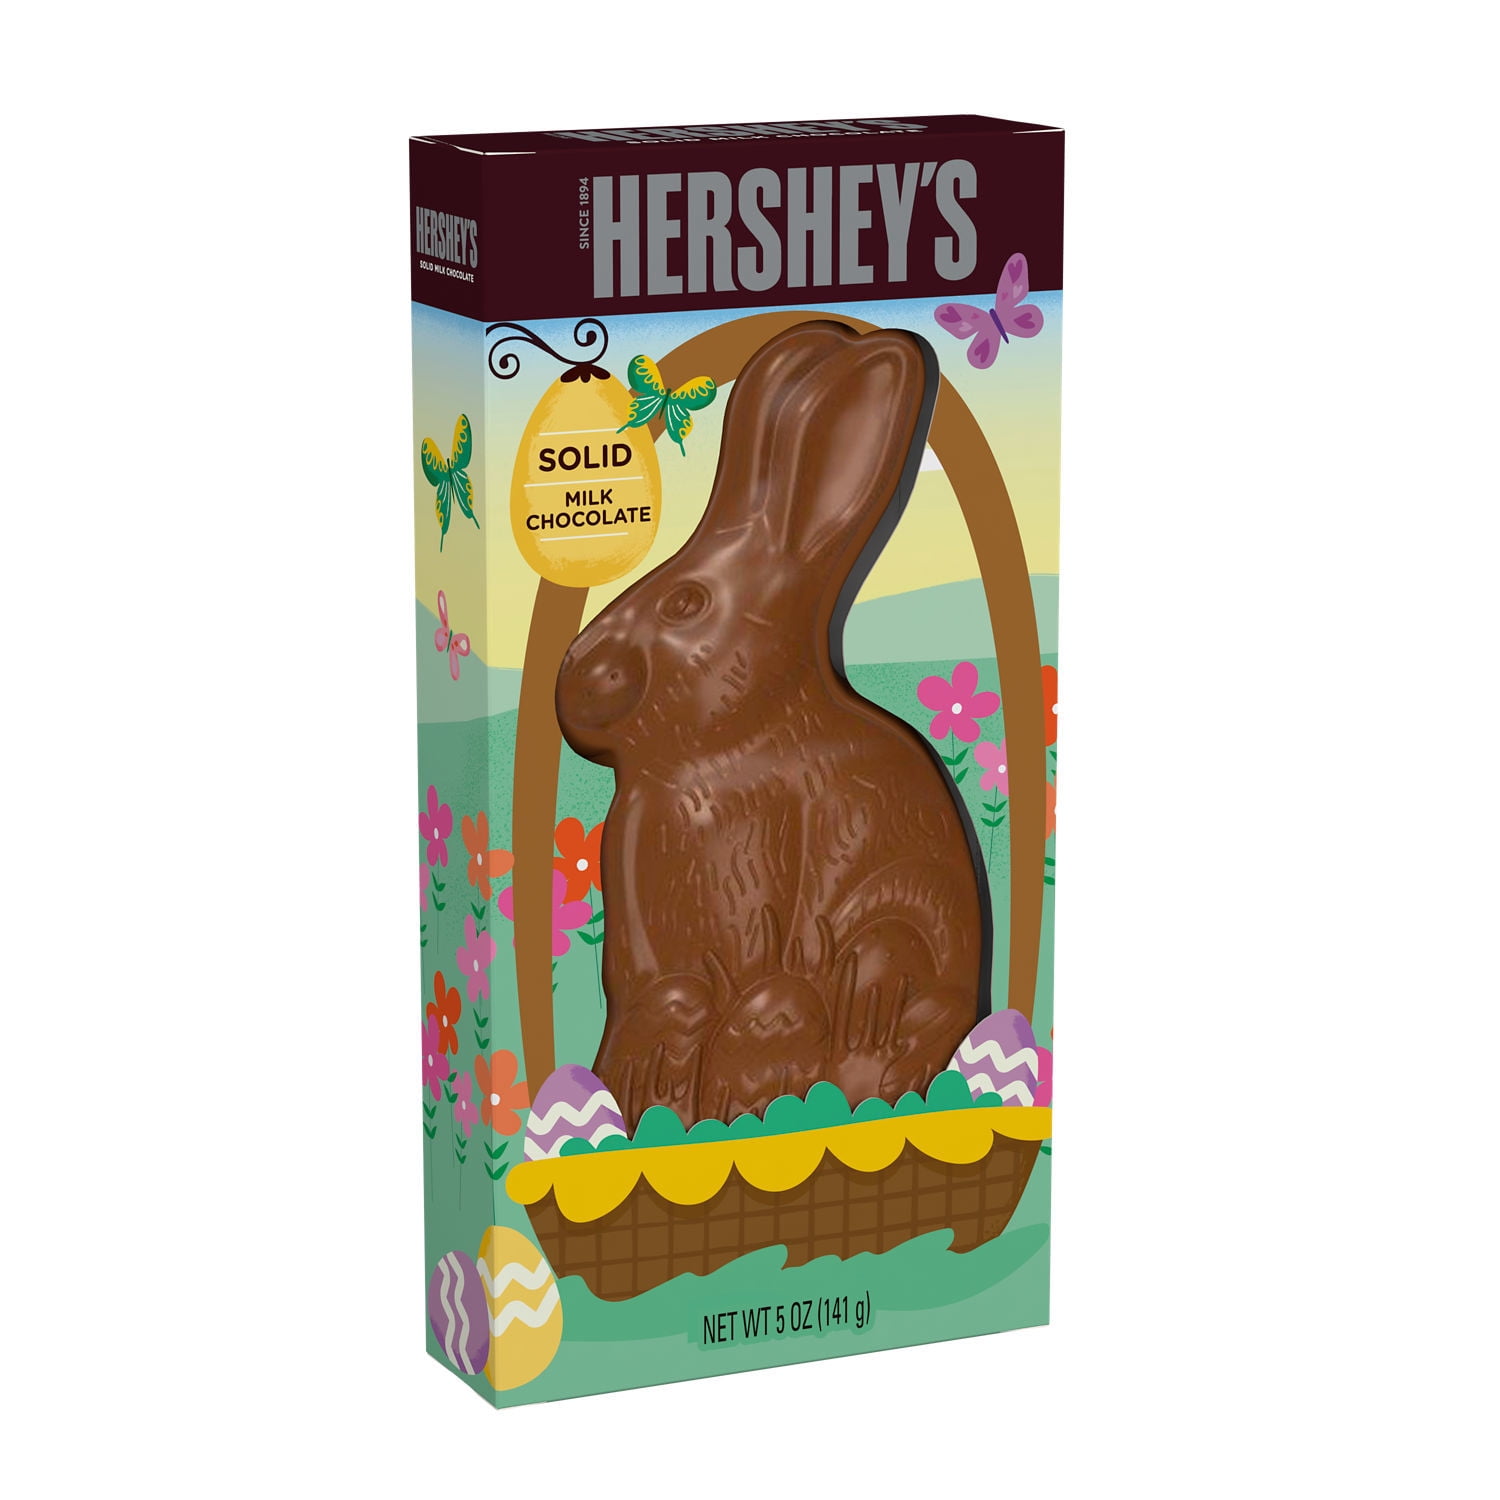 HERSHEY'S, Solid Milk Chocolate Bunny, Easter Candy, 5 oz, Gift Box